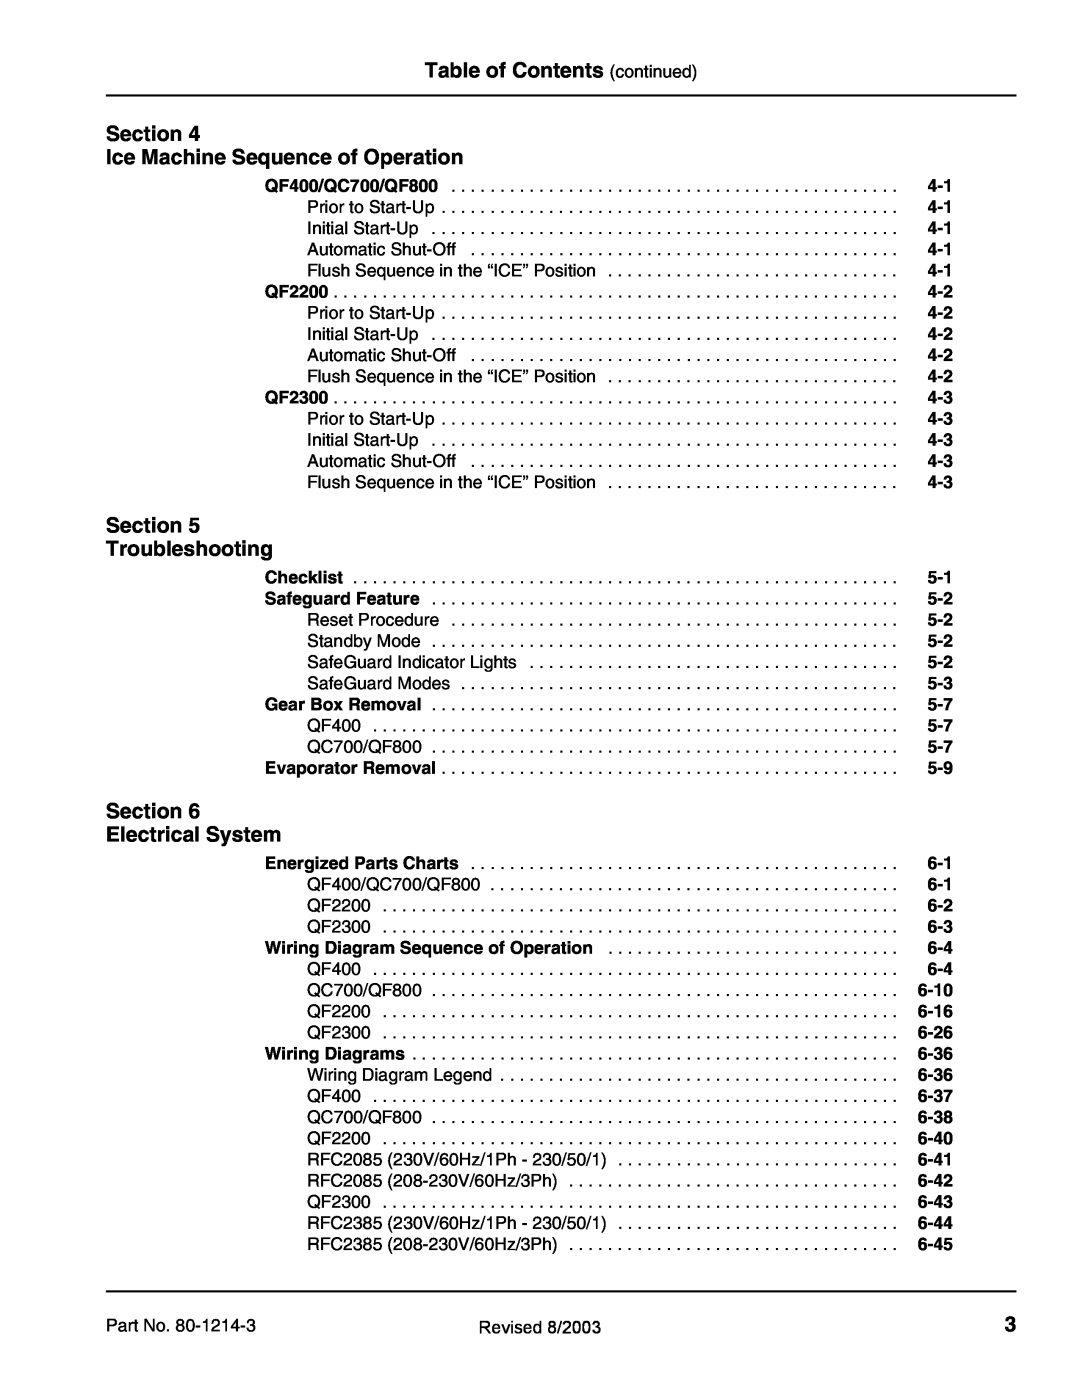 Manitowoc Ice QF2300 Table of Contents continued Section, Ice Machine Sequence of Operation, Section Troubleshooting, 6-10 